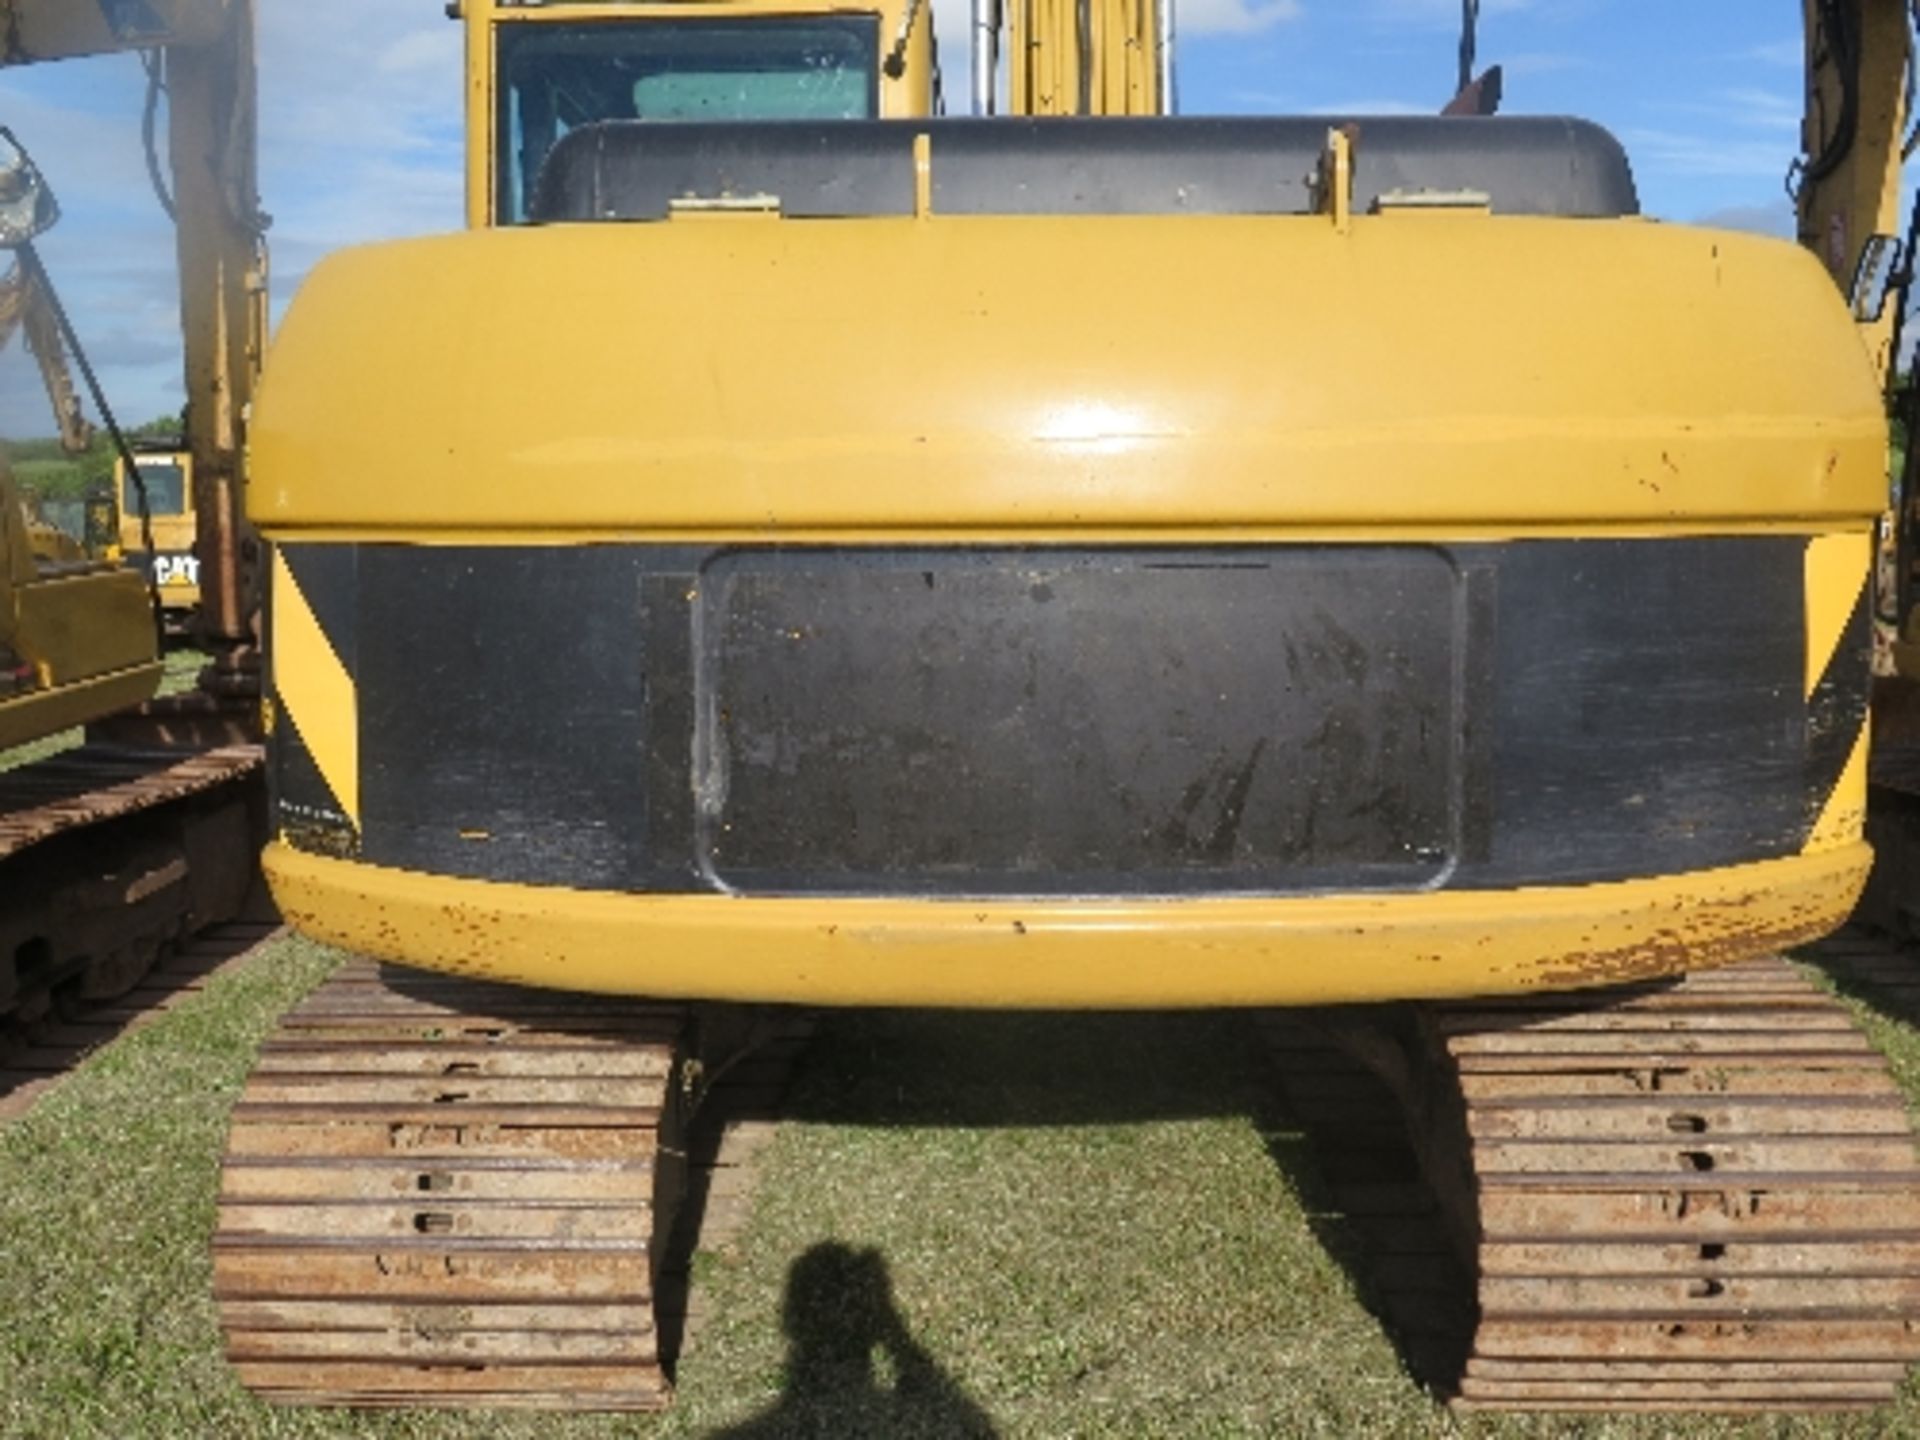 Caterpillar 312C excavator 4331 hrs 2006 145477
CANOPY DAMAGE
ONE SIDE POOR TRACKING FORWARD - - Image 2 of 9